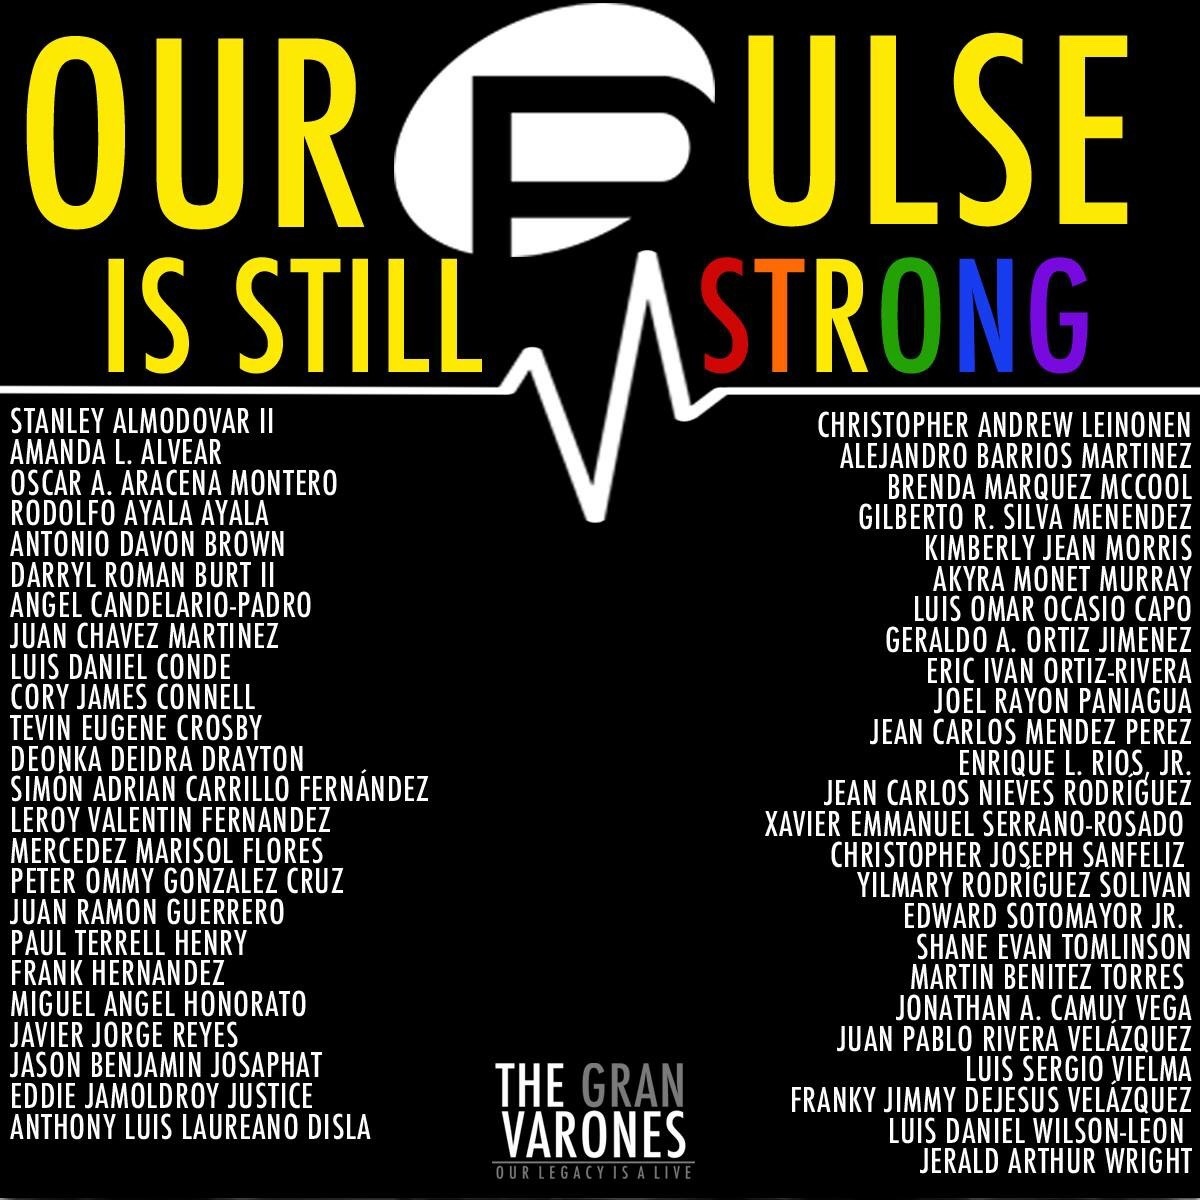 sanctuary is found on the dance floor. spirits are filled and pain is paused. last year’s attack at pulse night club in orlando, during latino night - was an attack on all of us who have ever feared loving openly in public.
today, we mourn the loss...